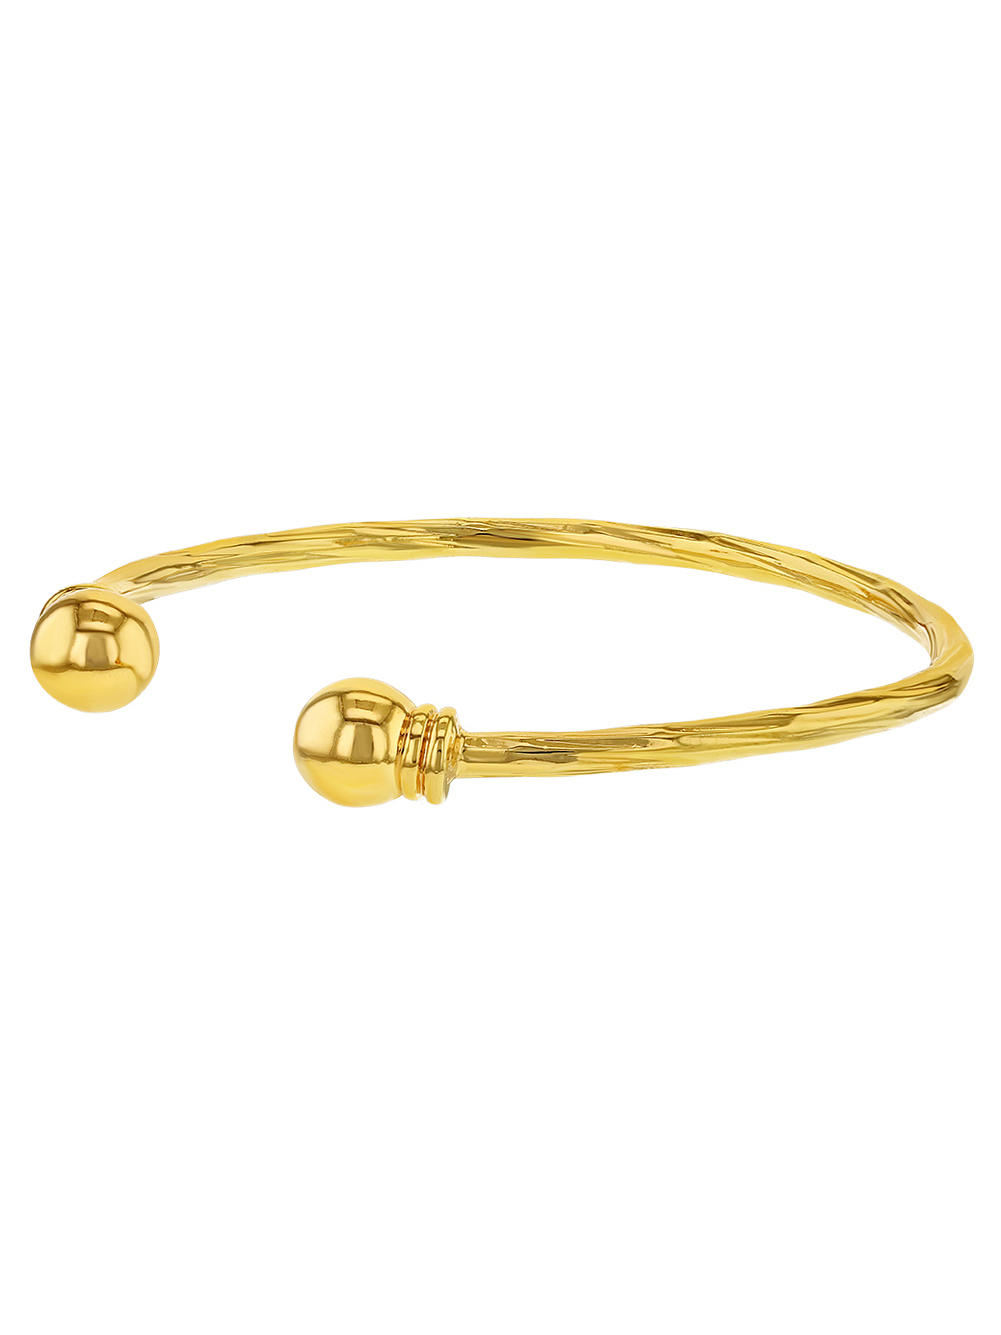 Shiny Yellow Gold Plated Adorable Twisted Cable Cuff Newborn Baby Bracelet 40mm - image 2 of 4